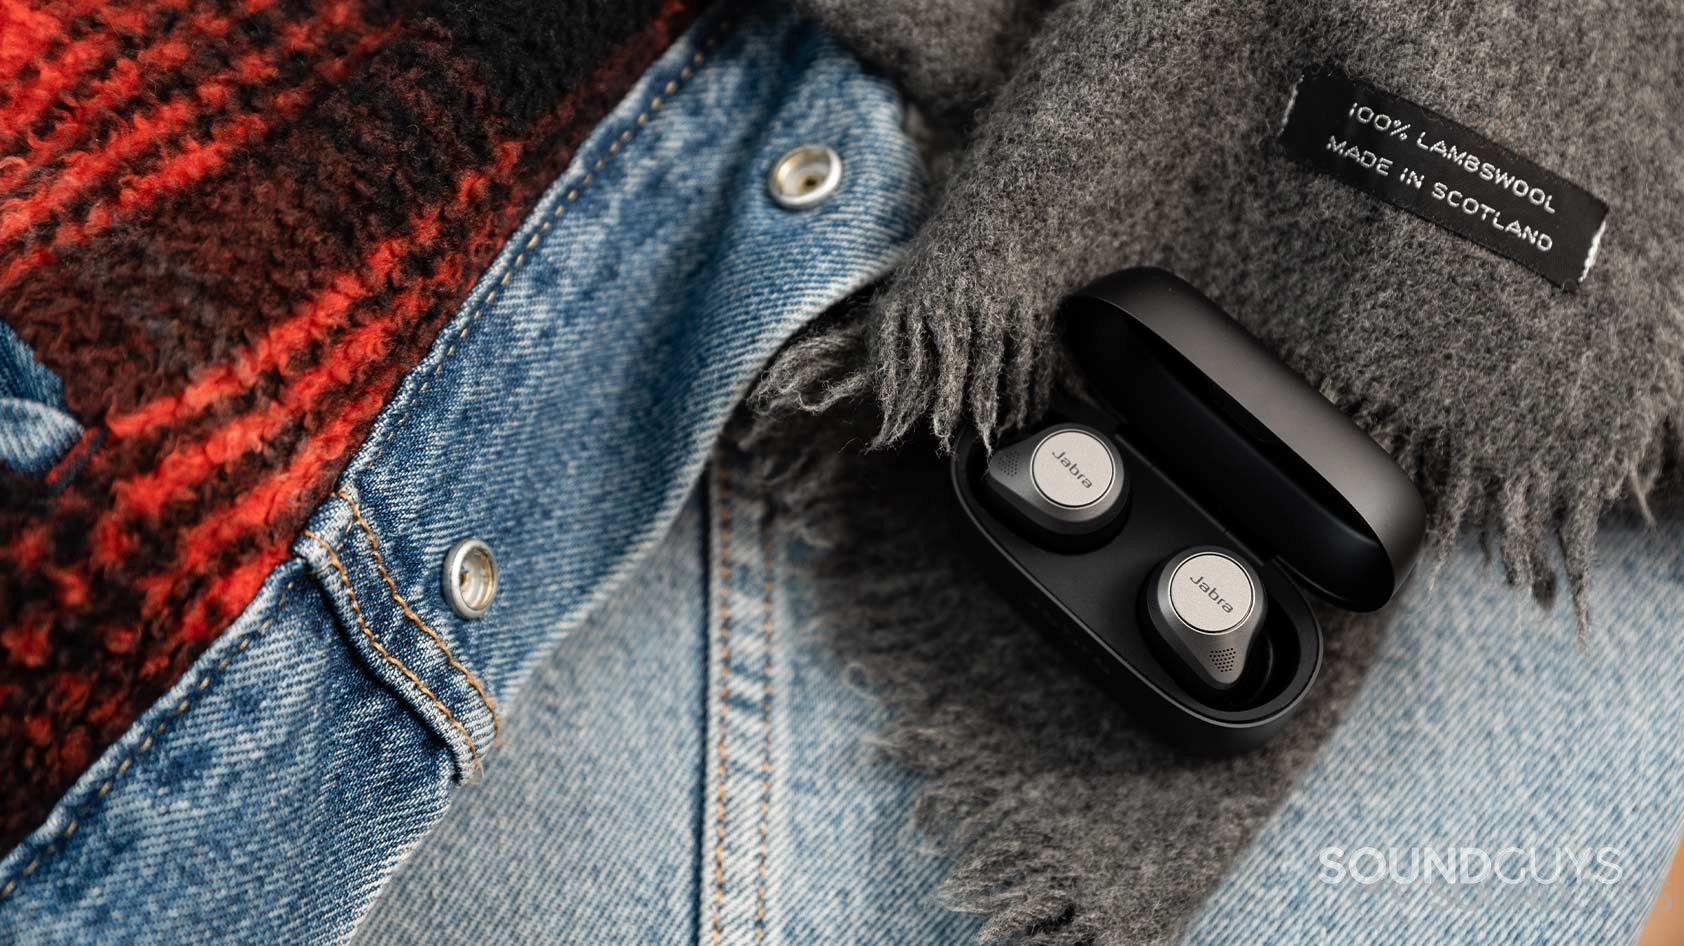 The Jabra Elite 85t noise canceling true wireless earbuds in an open case and on top of a denim jacket.